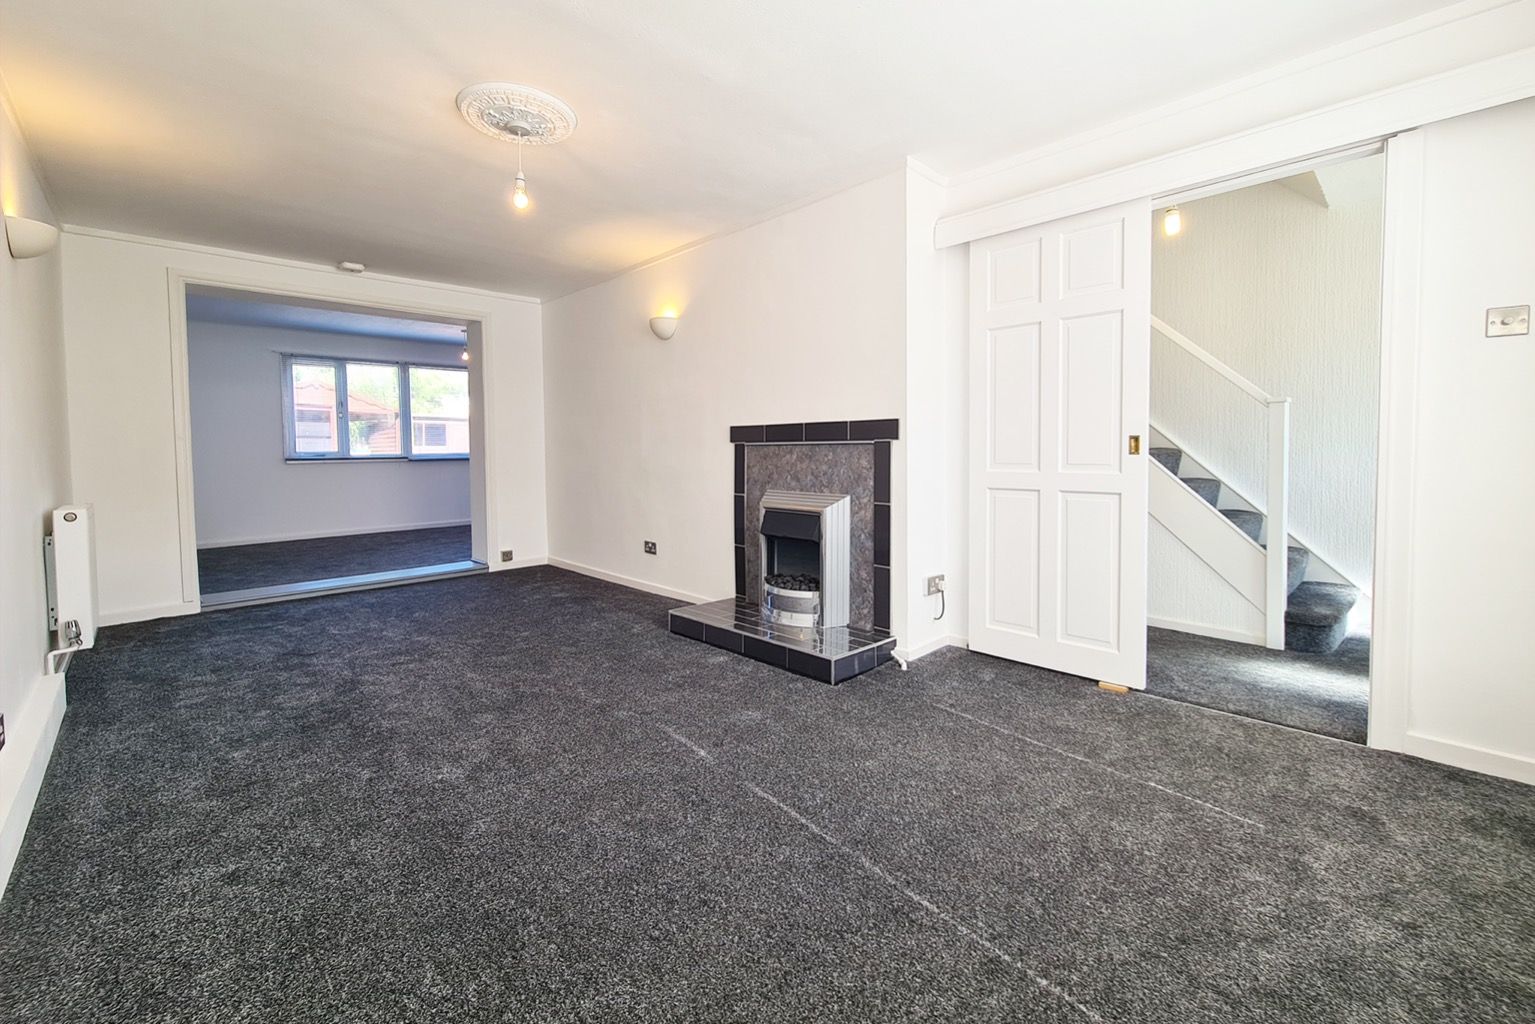 This beautiful home is available to rent on a long term basis, it's ready to go with new carpets, freshly decorated through and a brand new bathroom